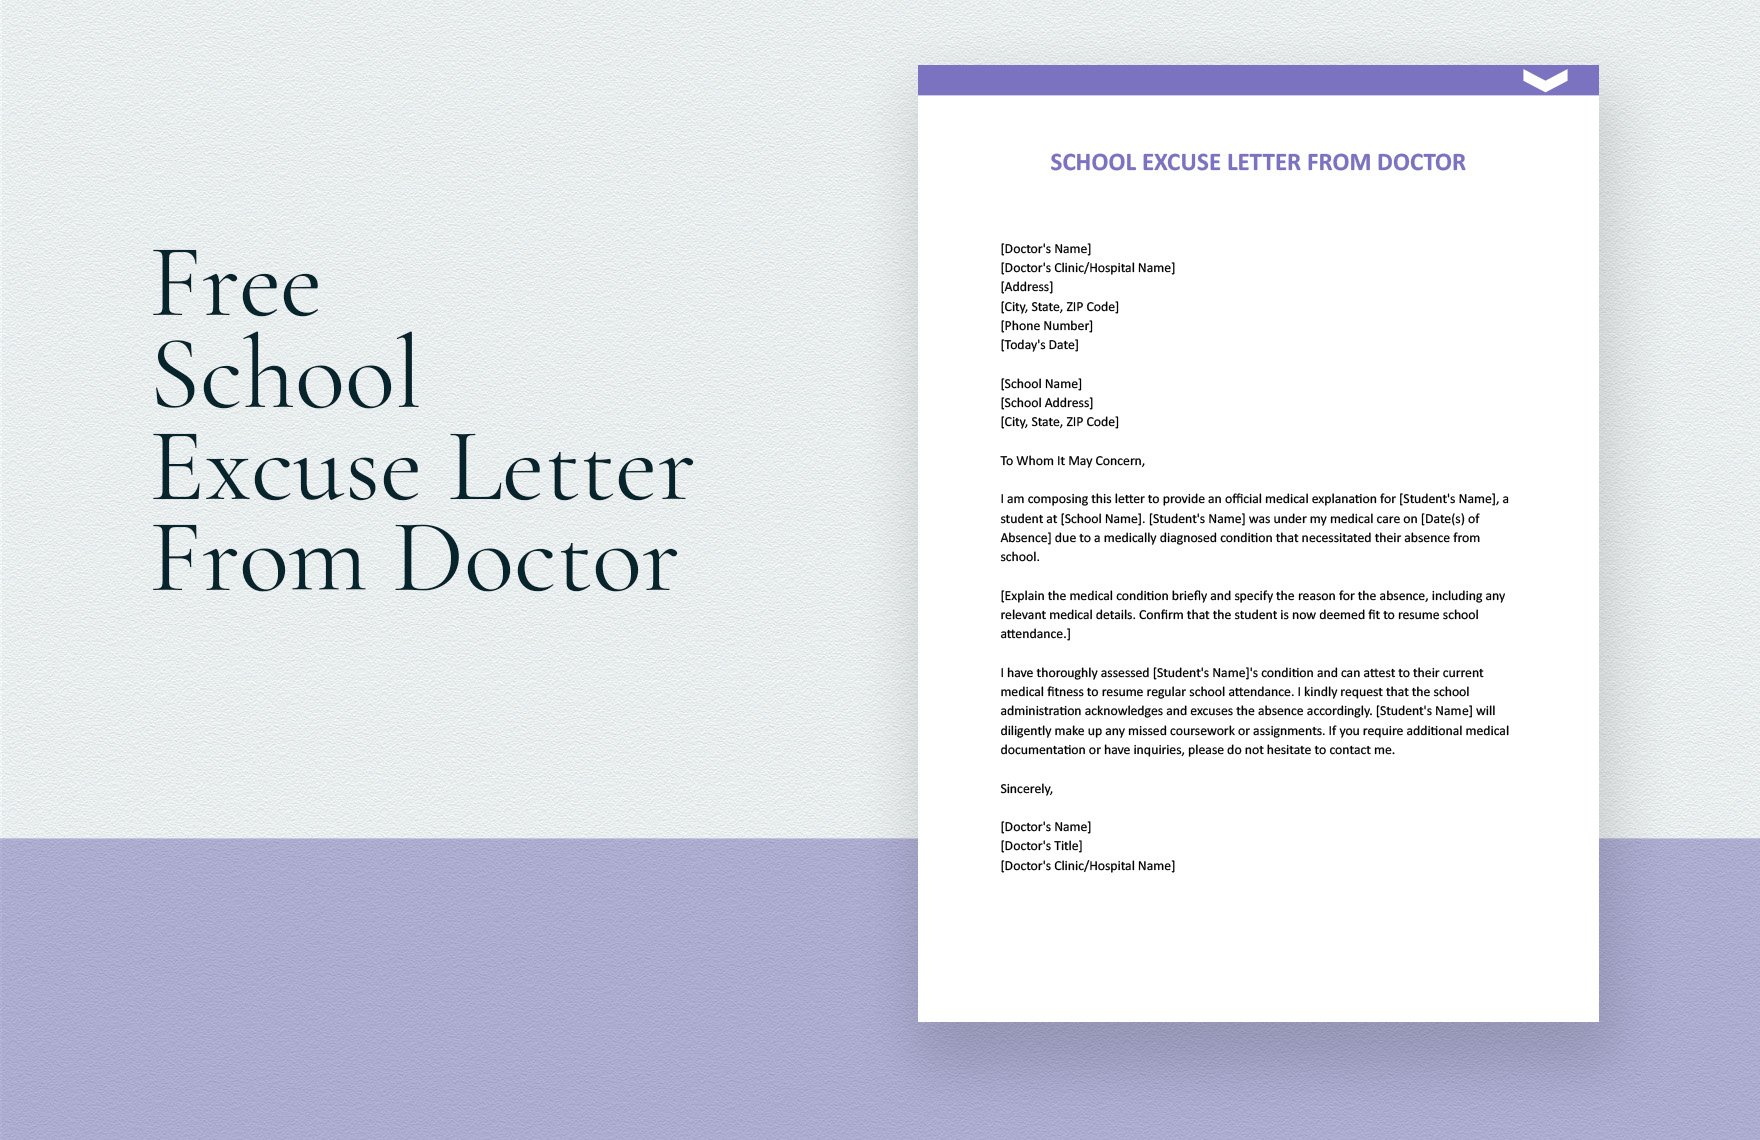 School Excuse Letter From Doctor